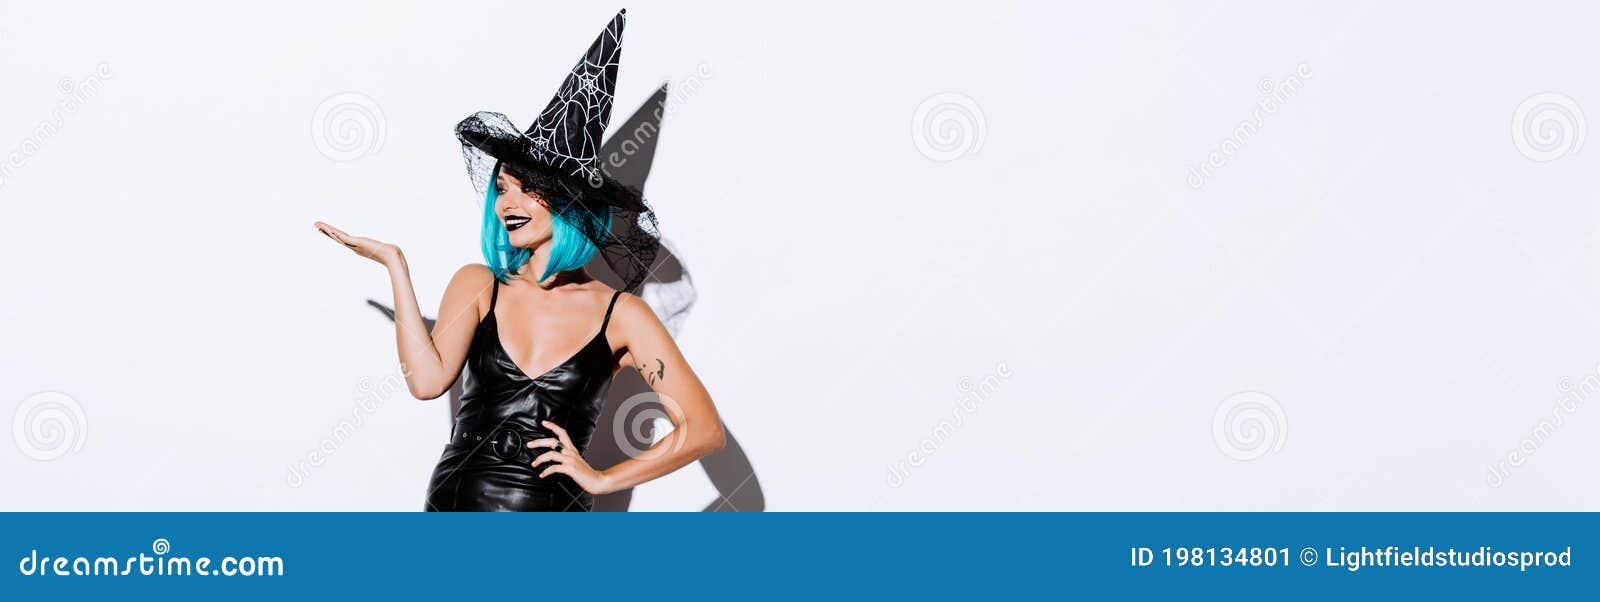 1. "Blue Haired Witch Halloween Costume" - wide 7